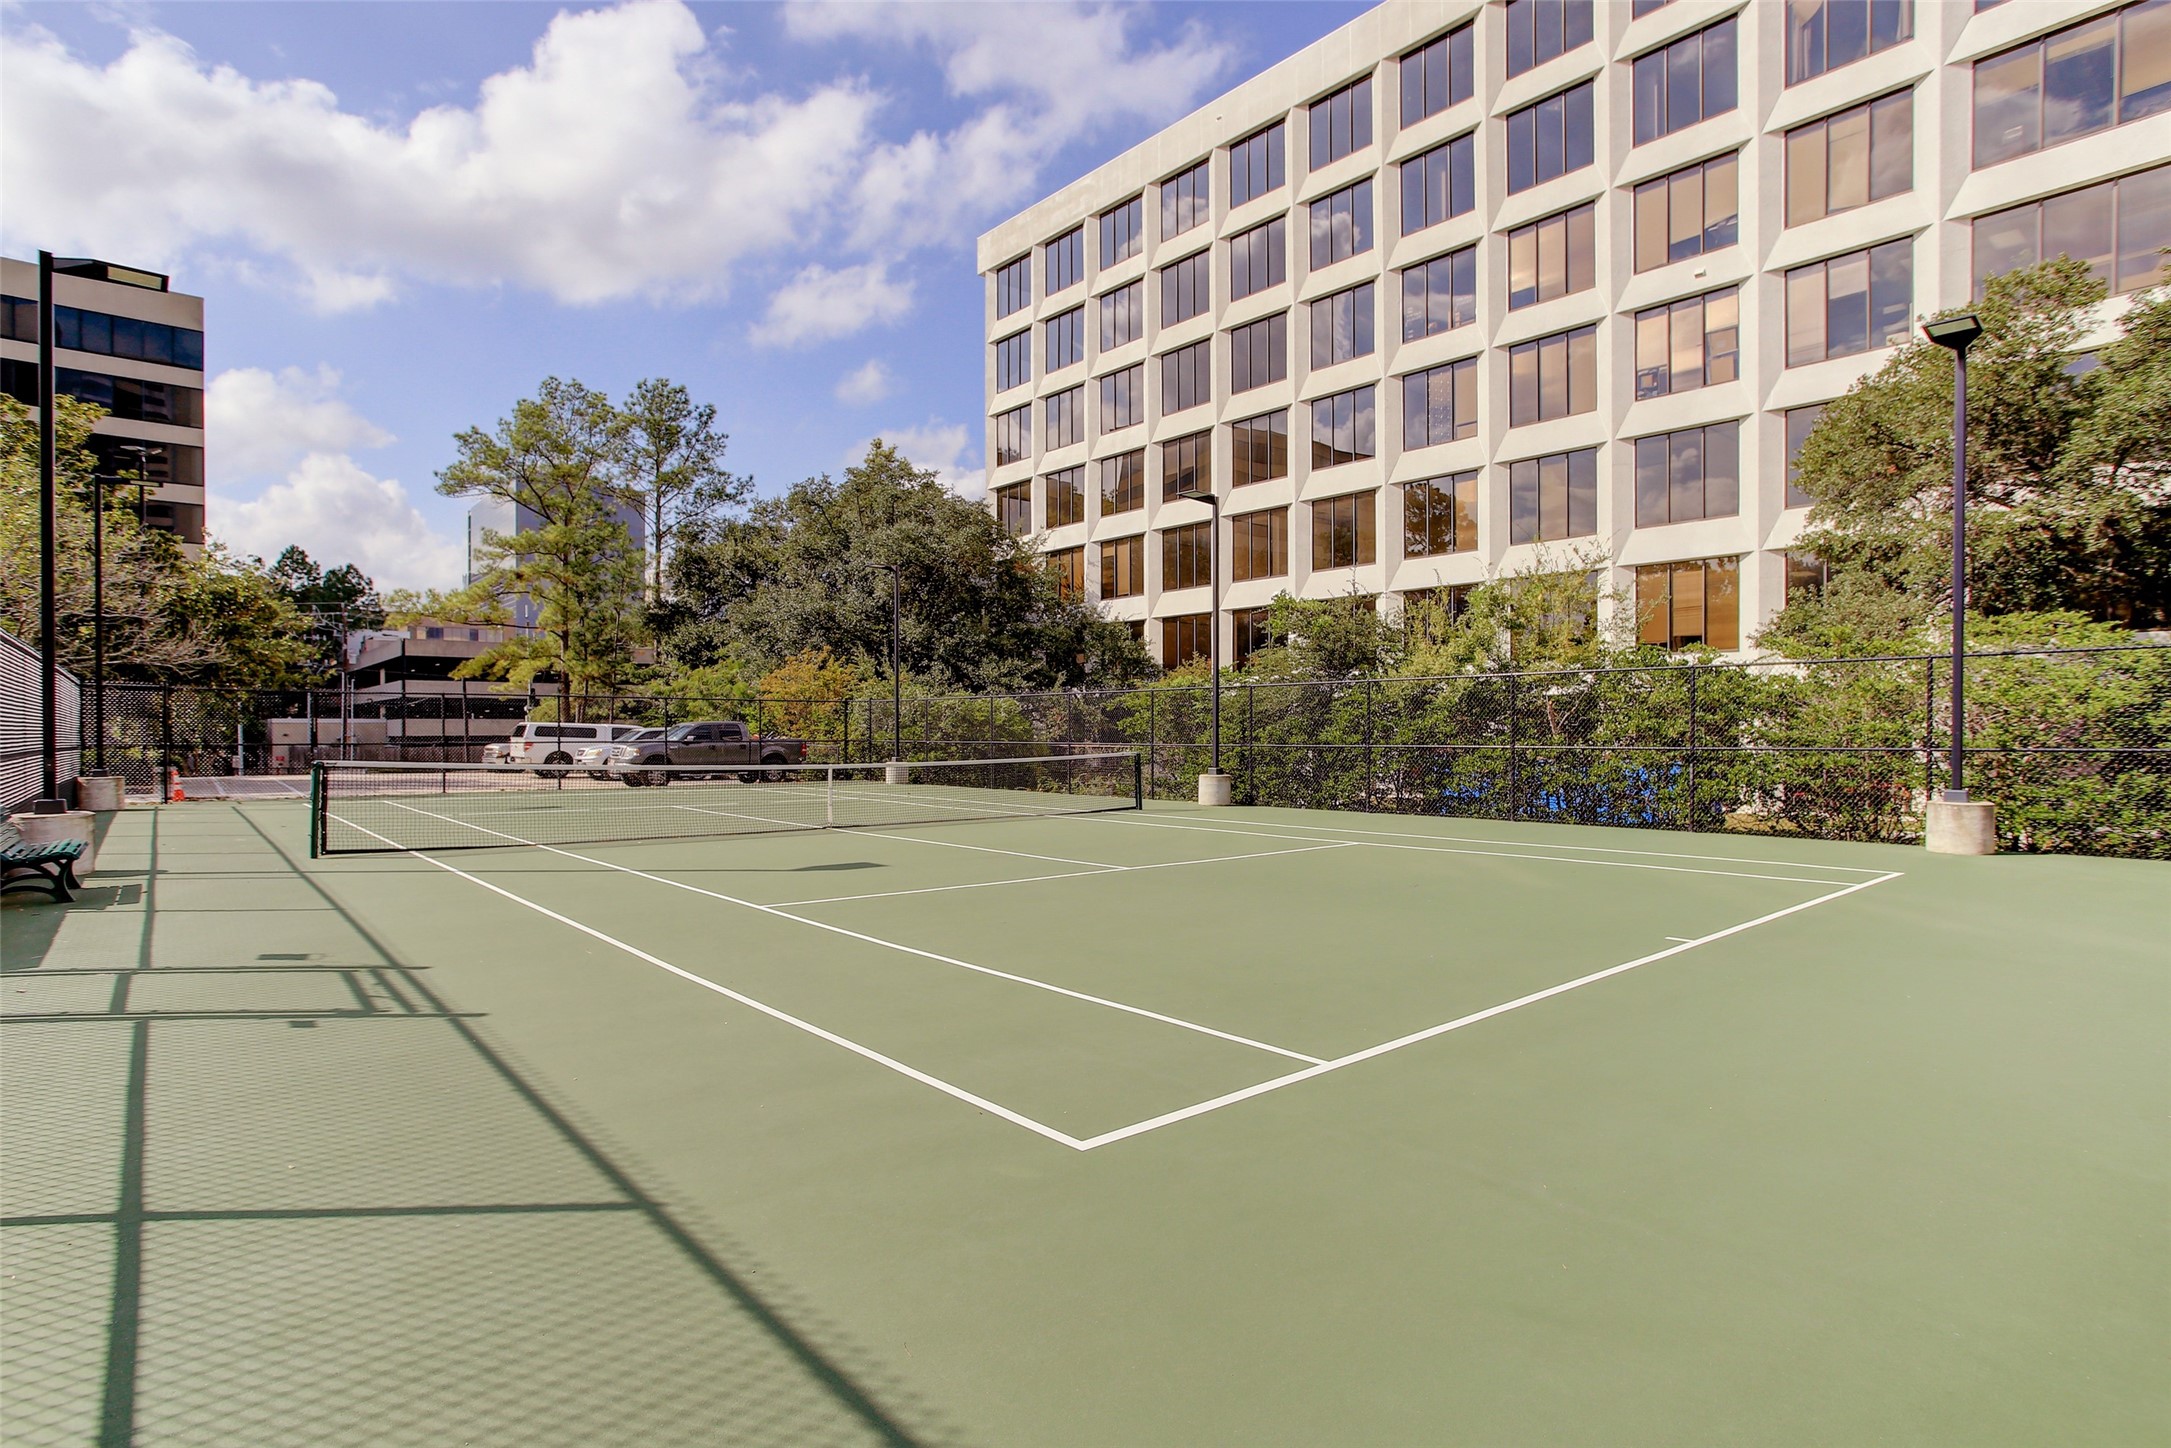 The Tennis Court can also be used as a pickleball court.